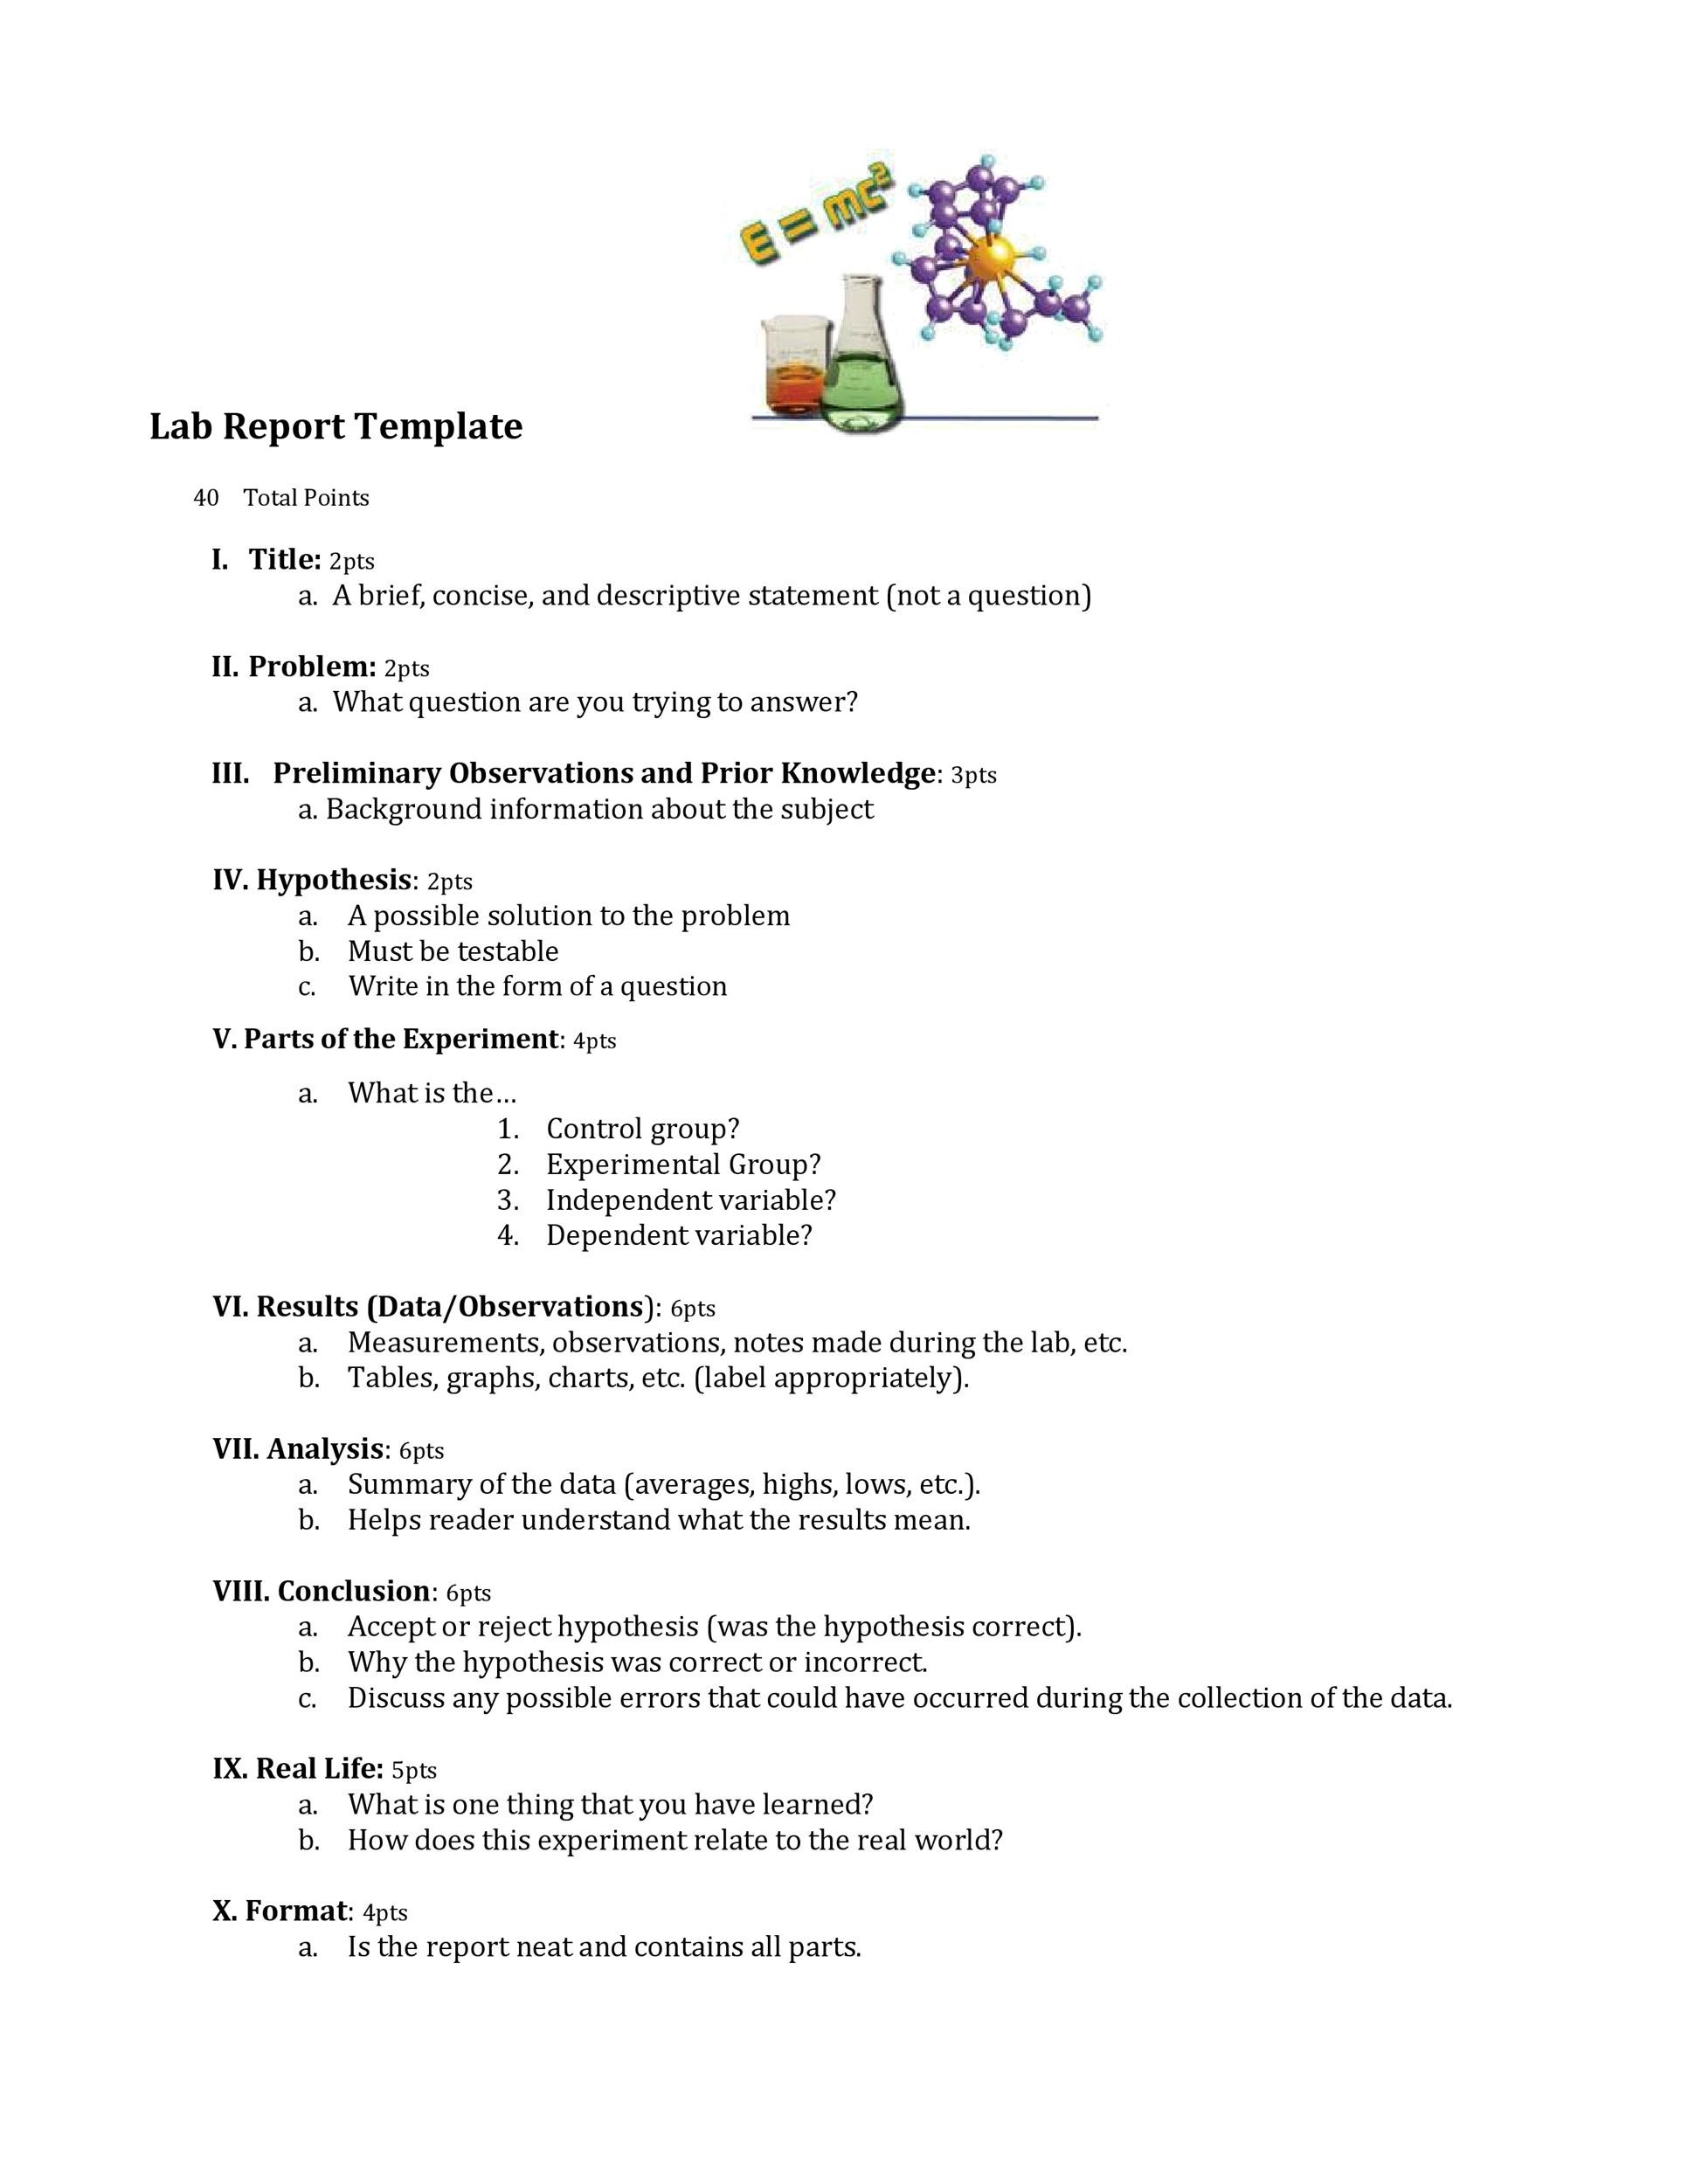 Free lab report template 23